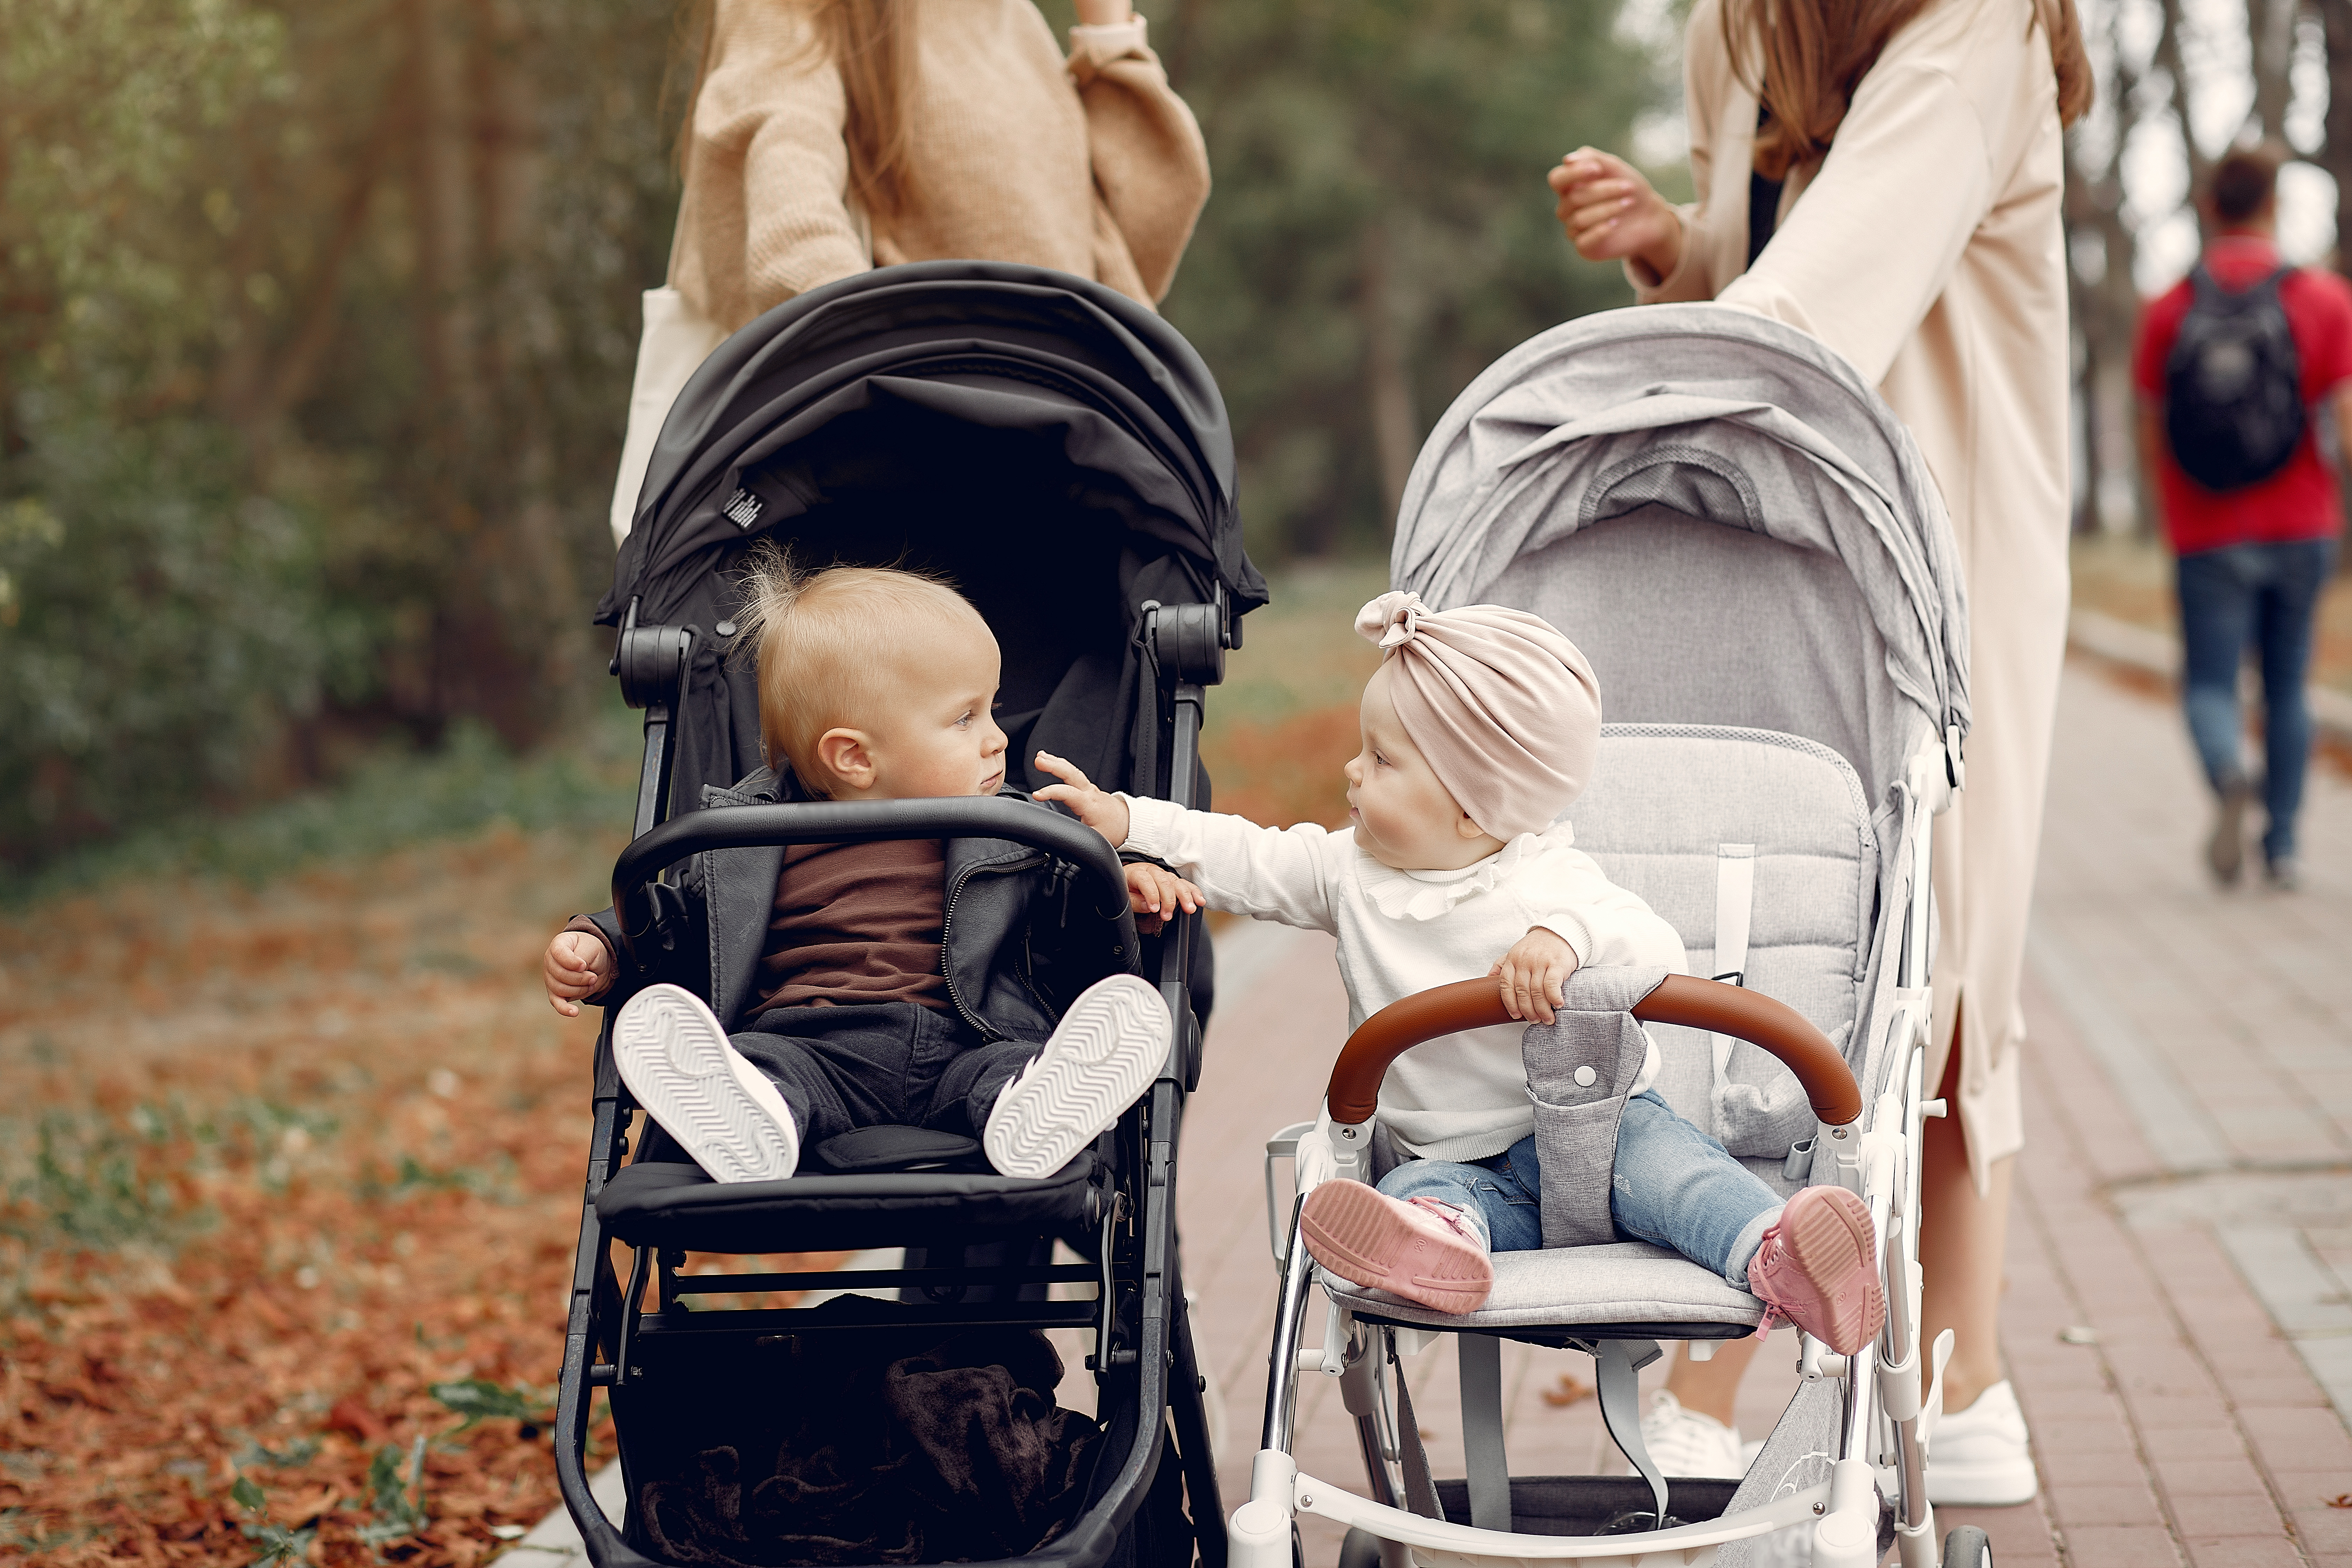 Two babies playing with each other in separate strollers